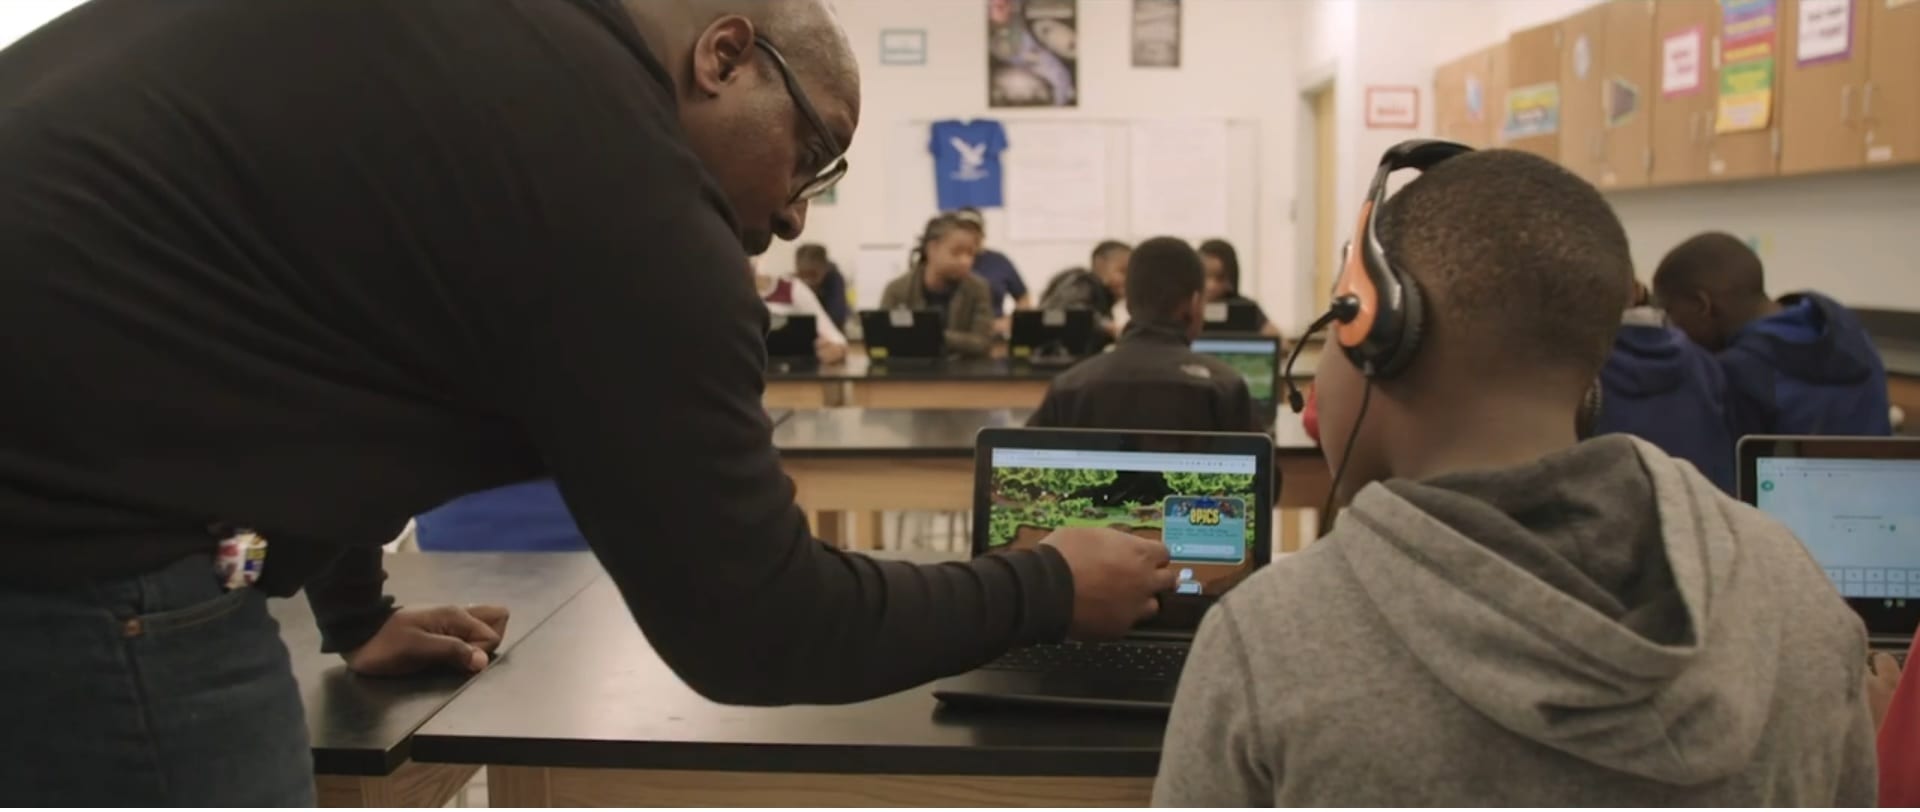 VR technology in classroom